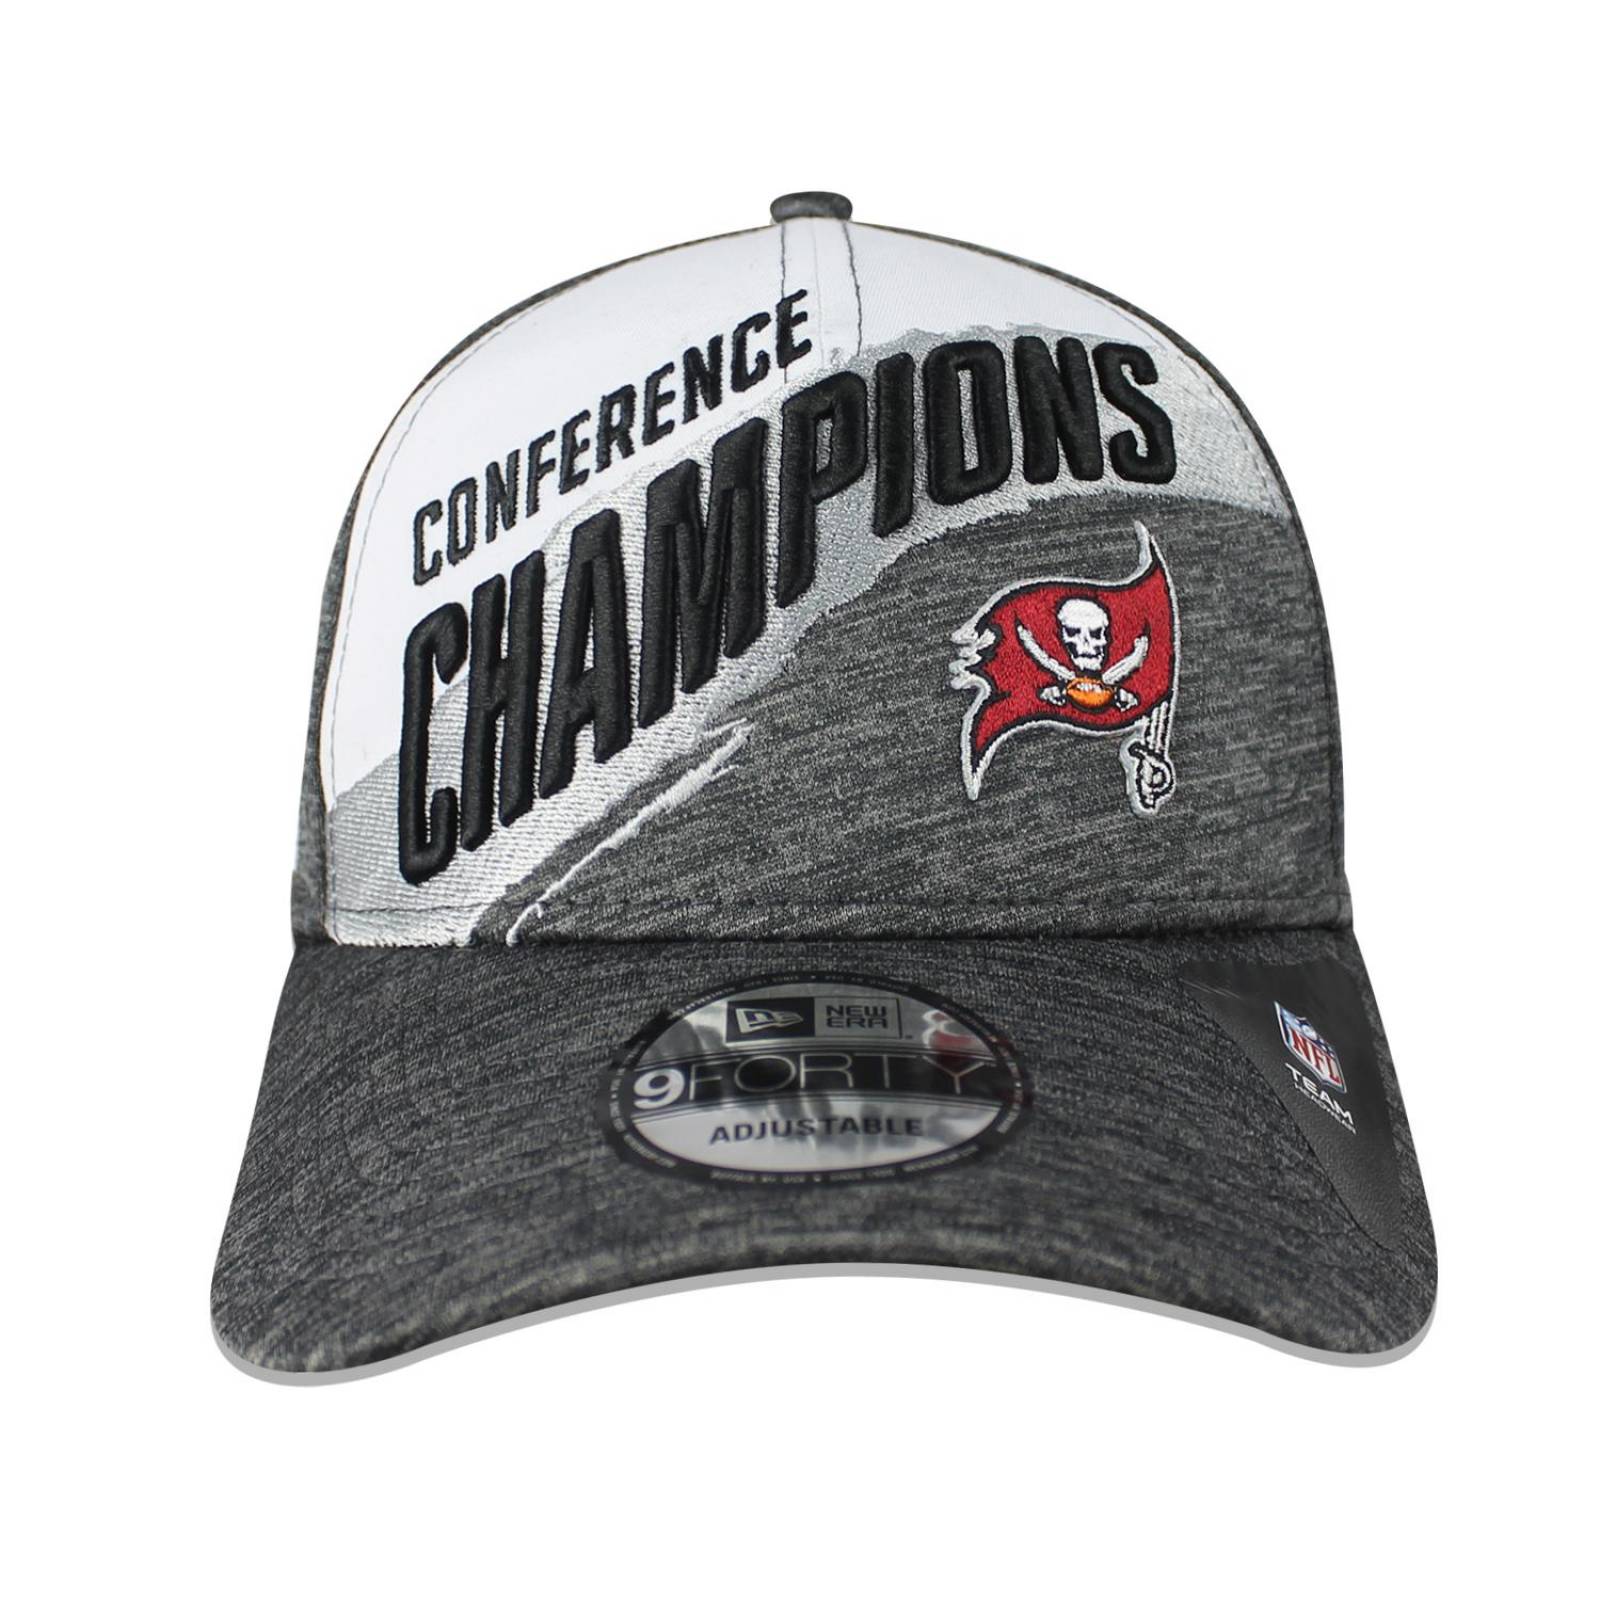 Gorra New Era 9 Forty Buccaneers Conference Champions Official Locker Room Tampa Bay Unitalla 